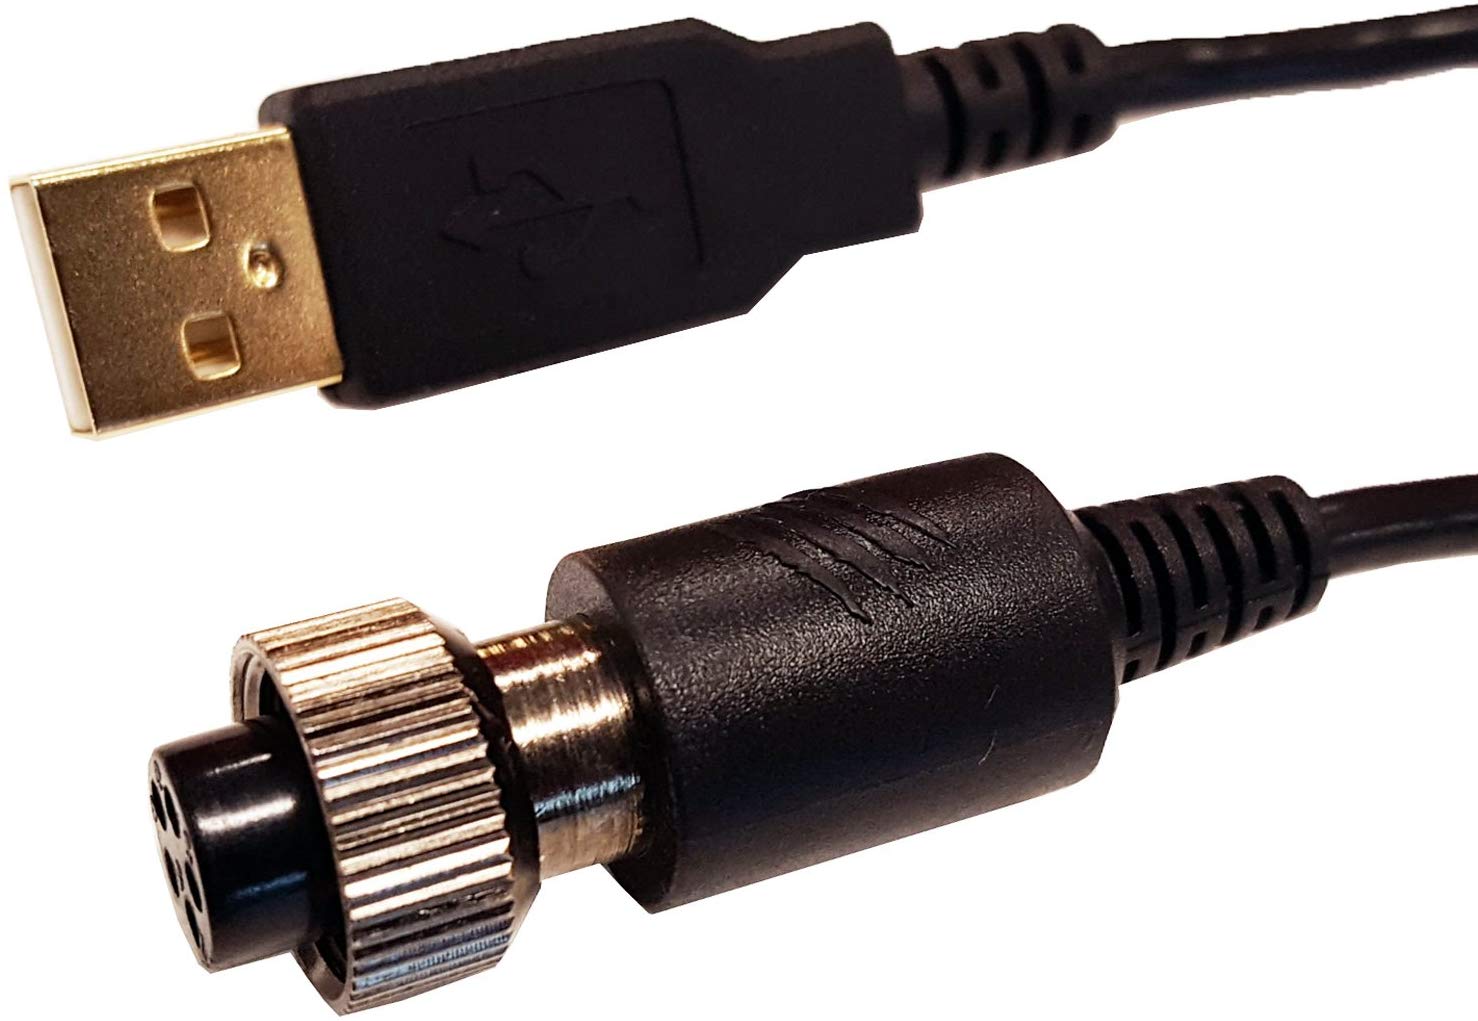 Mad Catz TE2 Replacement USB Cable for Tournament Edition FightSticks